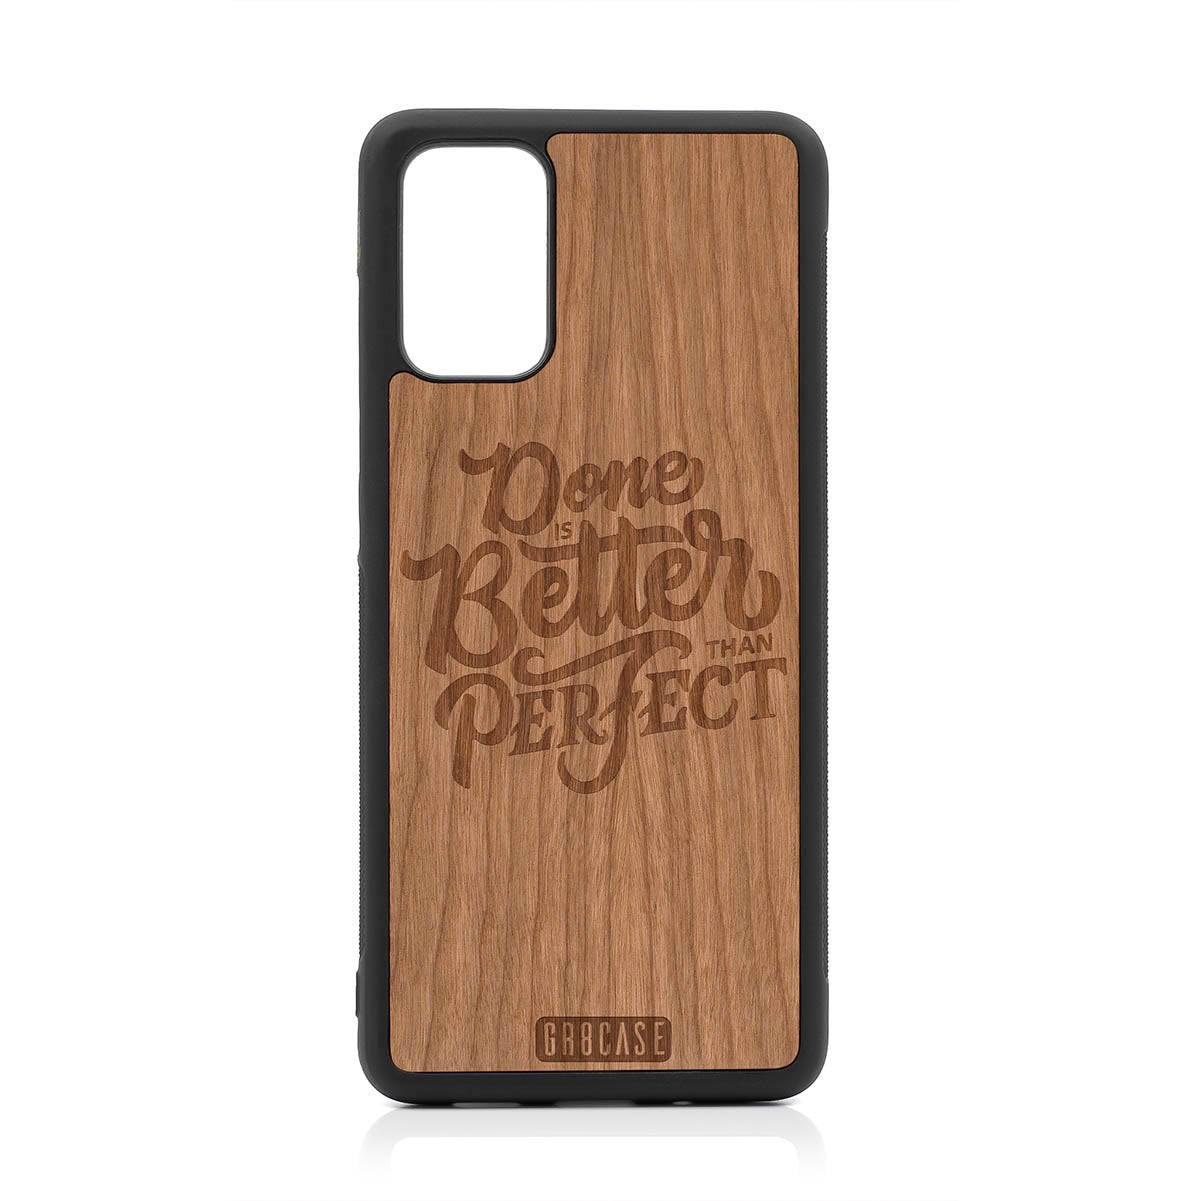 Done Is Better Than Perfect Design Wood Case For Samsung Galaxy S20 Plus by GR8CASE